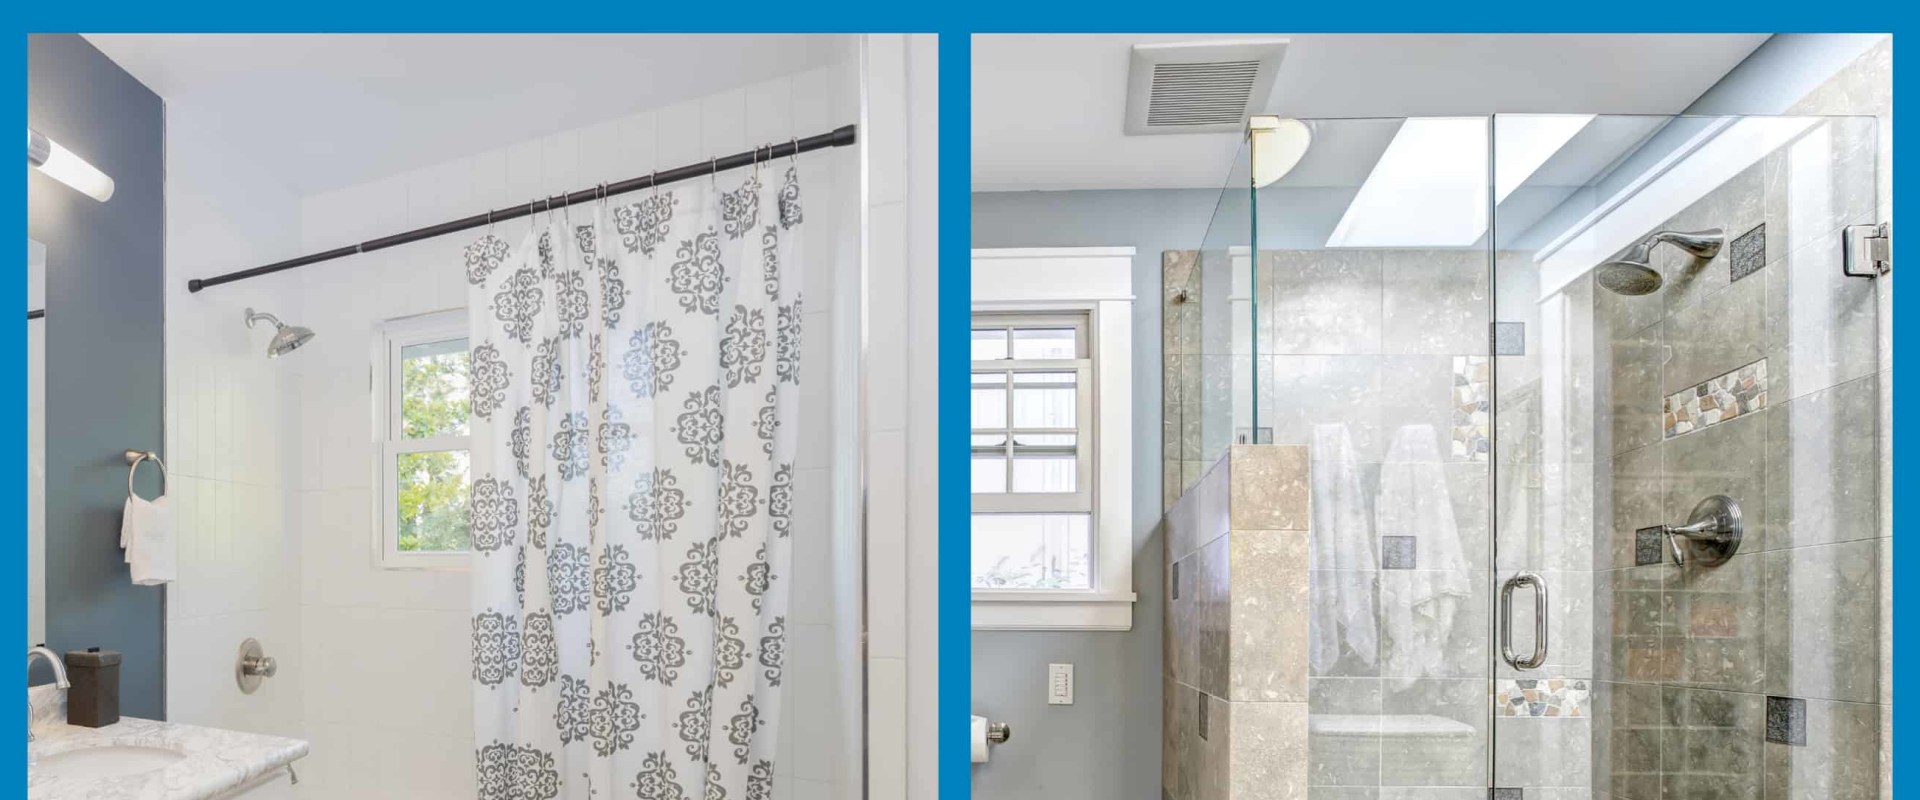 Glass Shower Doors vs. Shower Curtains: Which is Better?